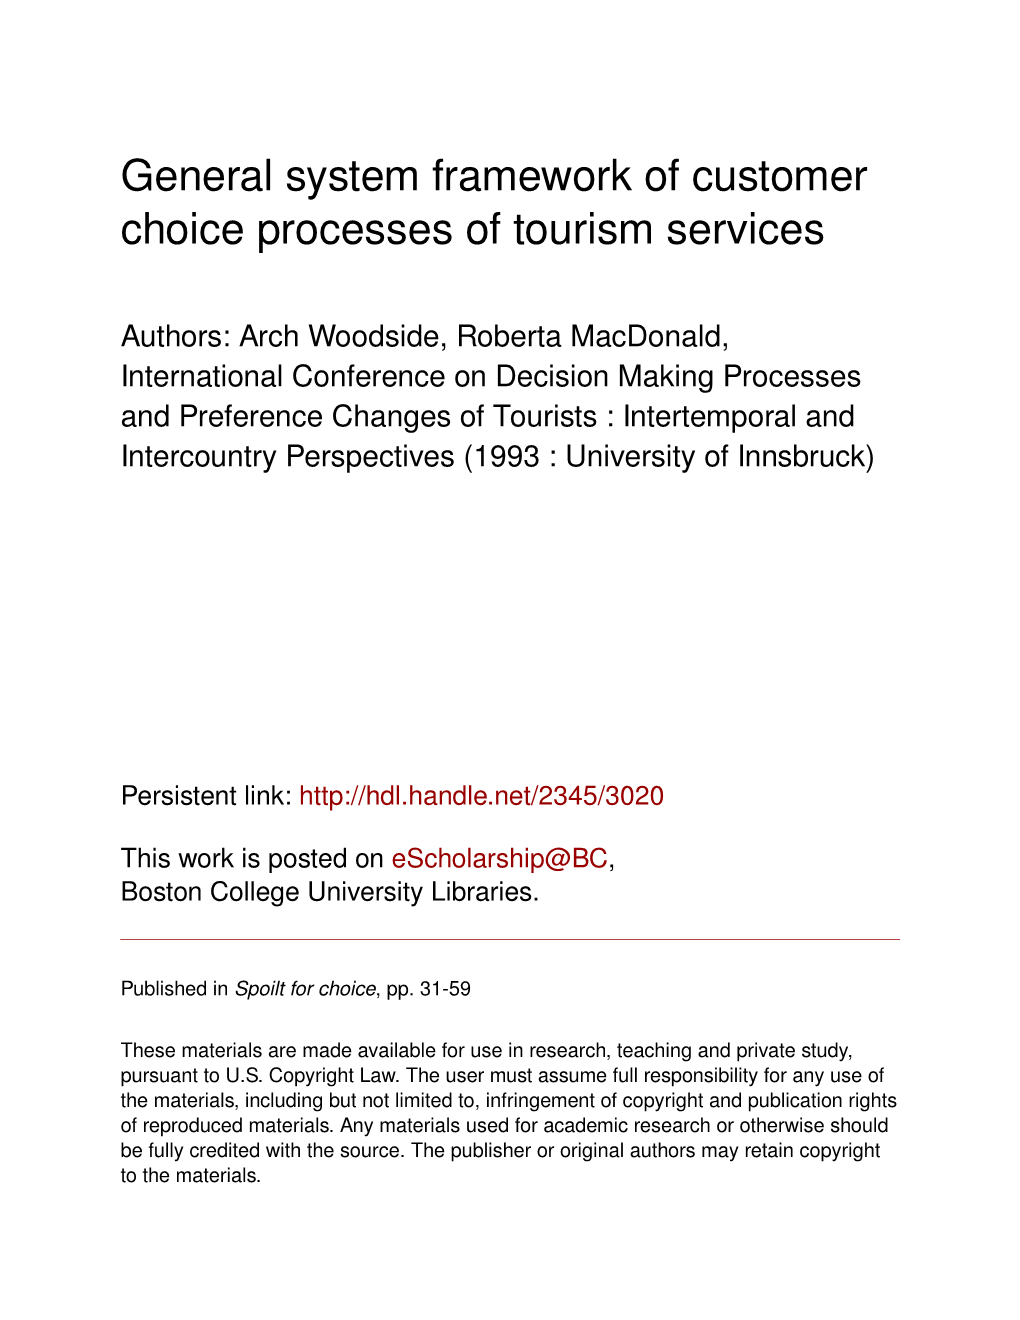 General System Framework of Customer Choice Processes of Tourism Services